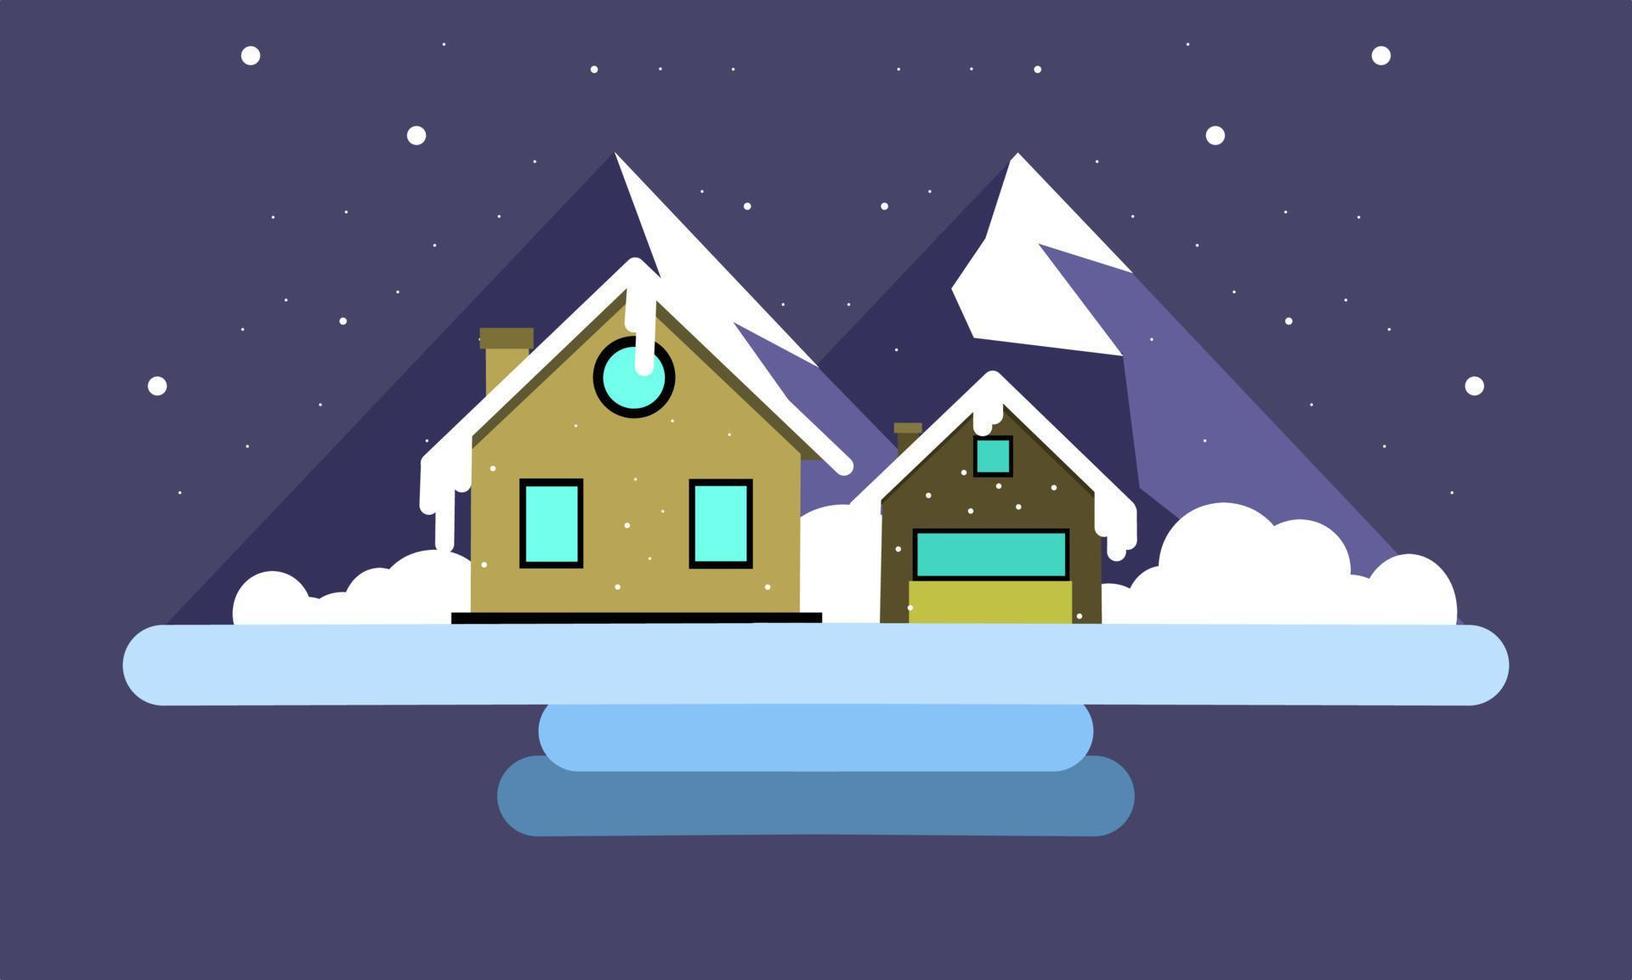 Winter illustration, the view when winter comes vector